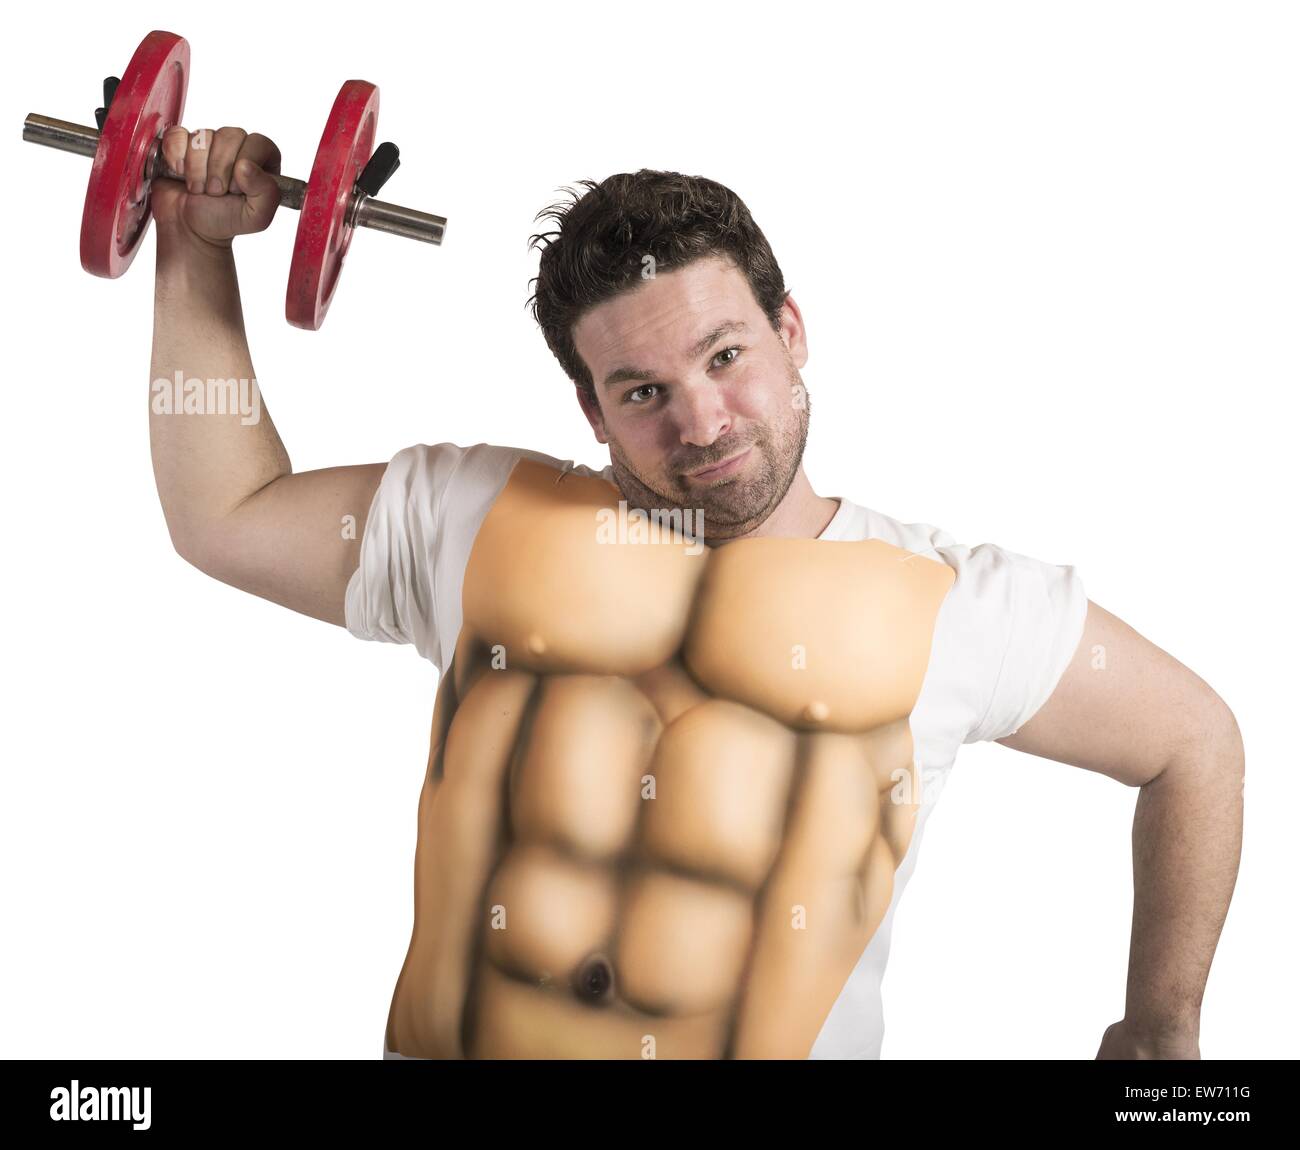 Fat man with abs Stock Photo